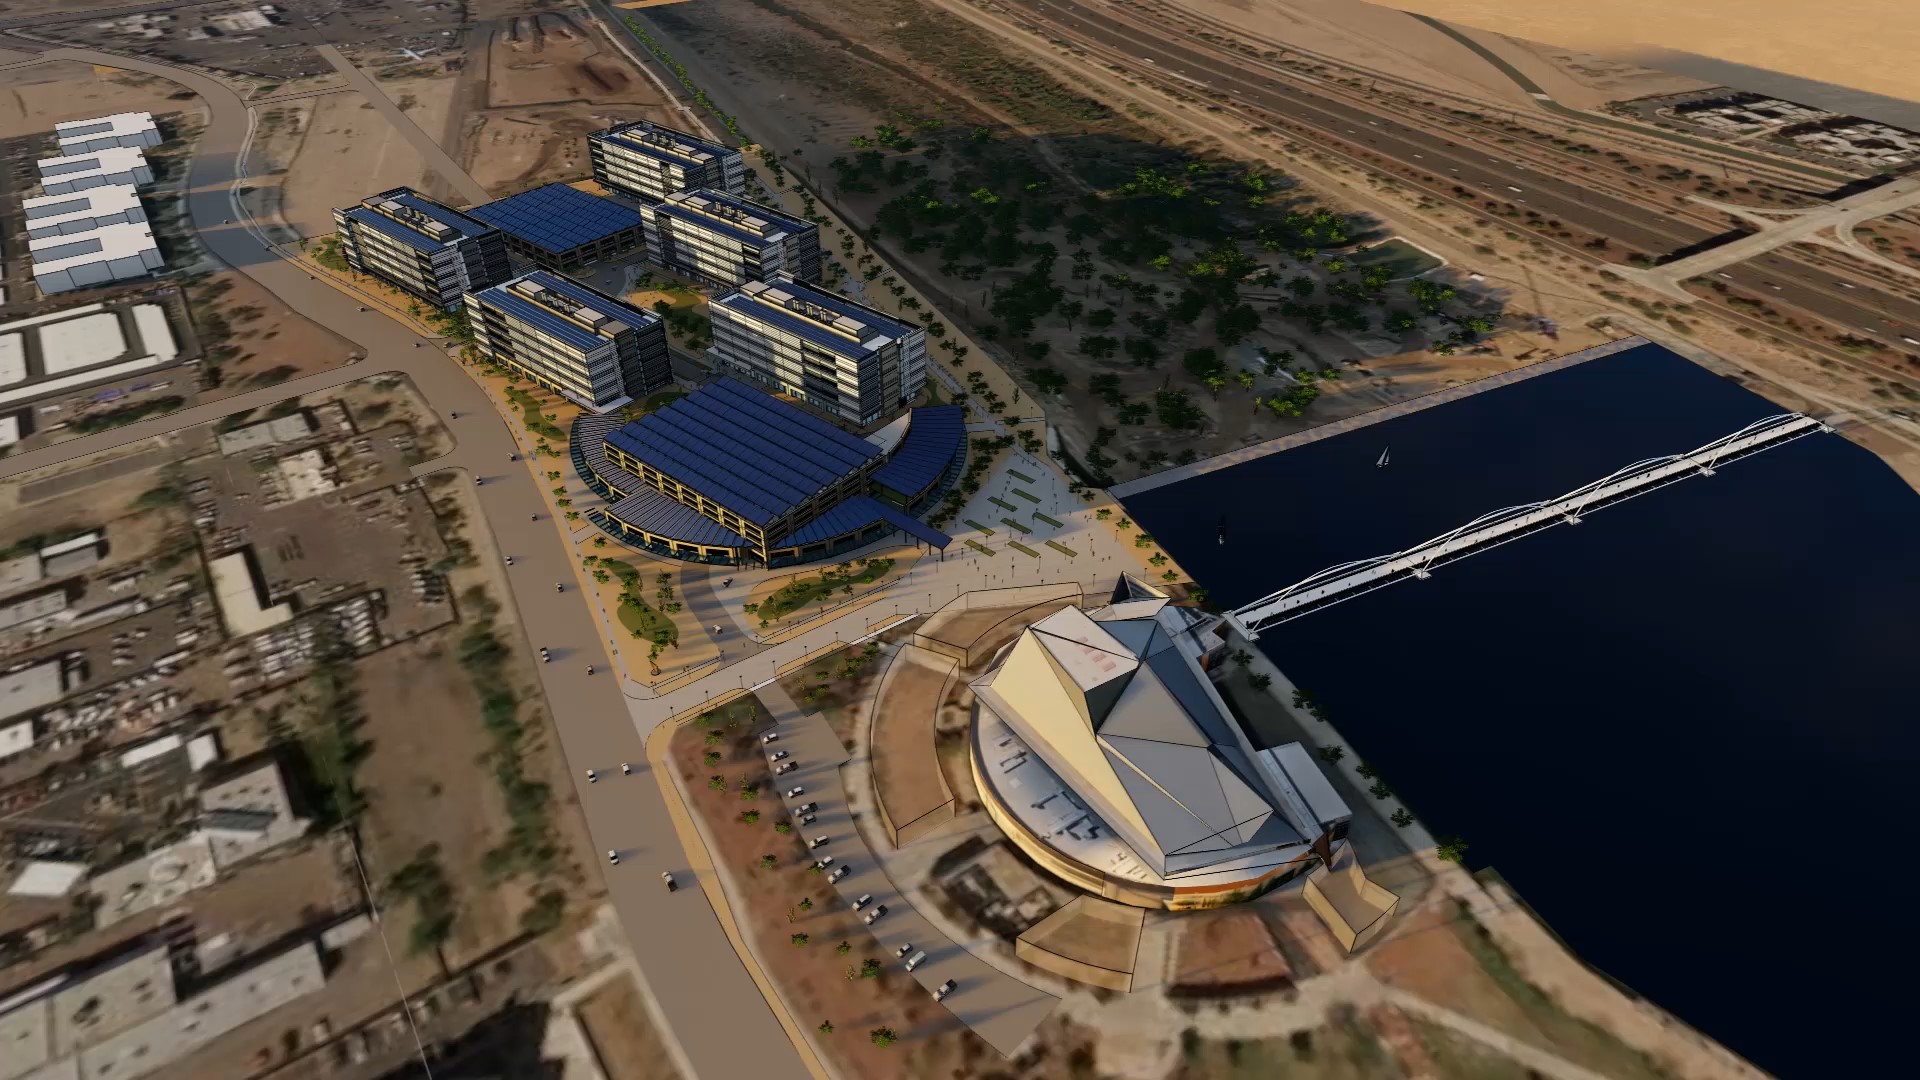 Tempe includes biomed and tech campus in its future